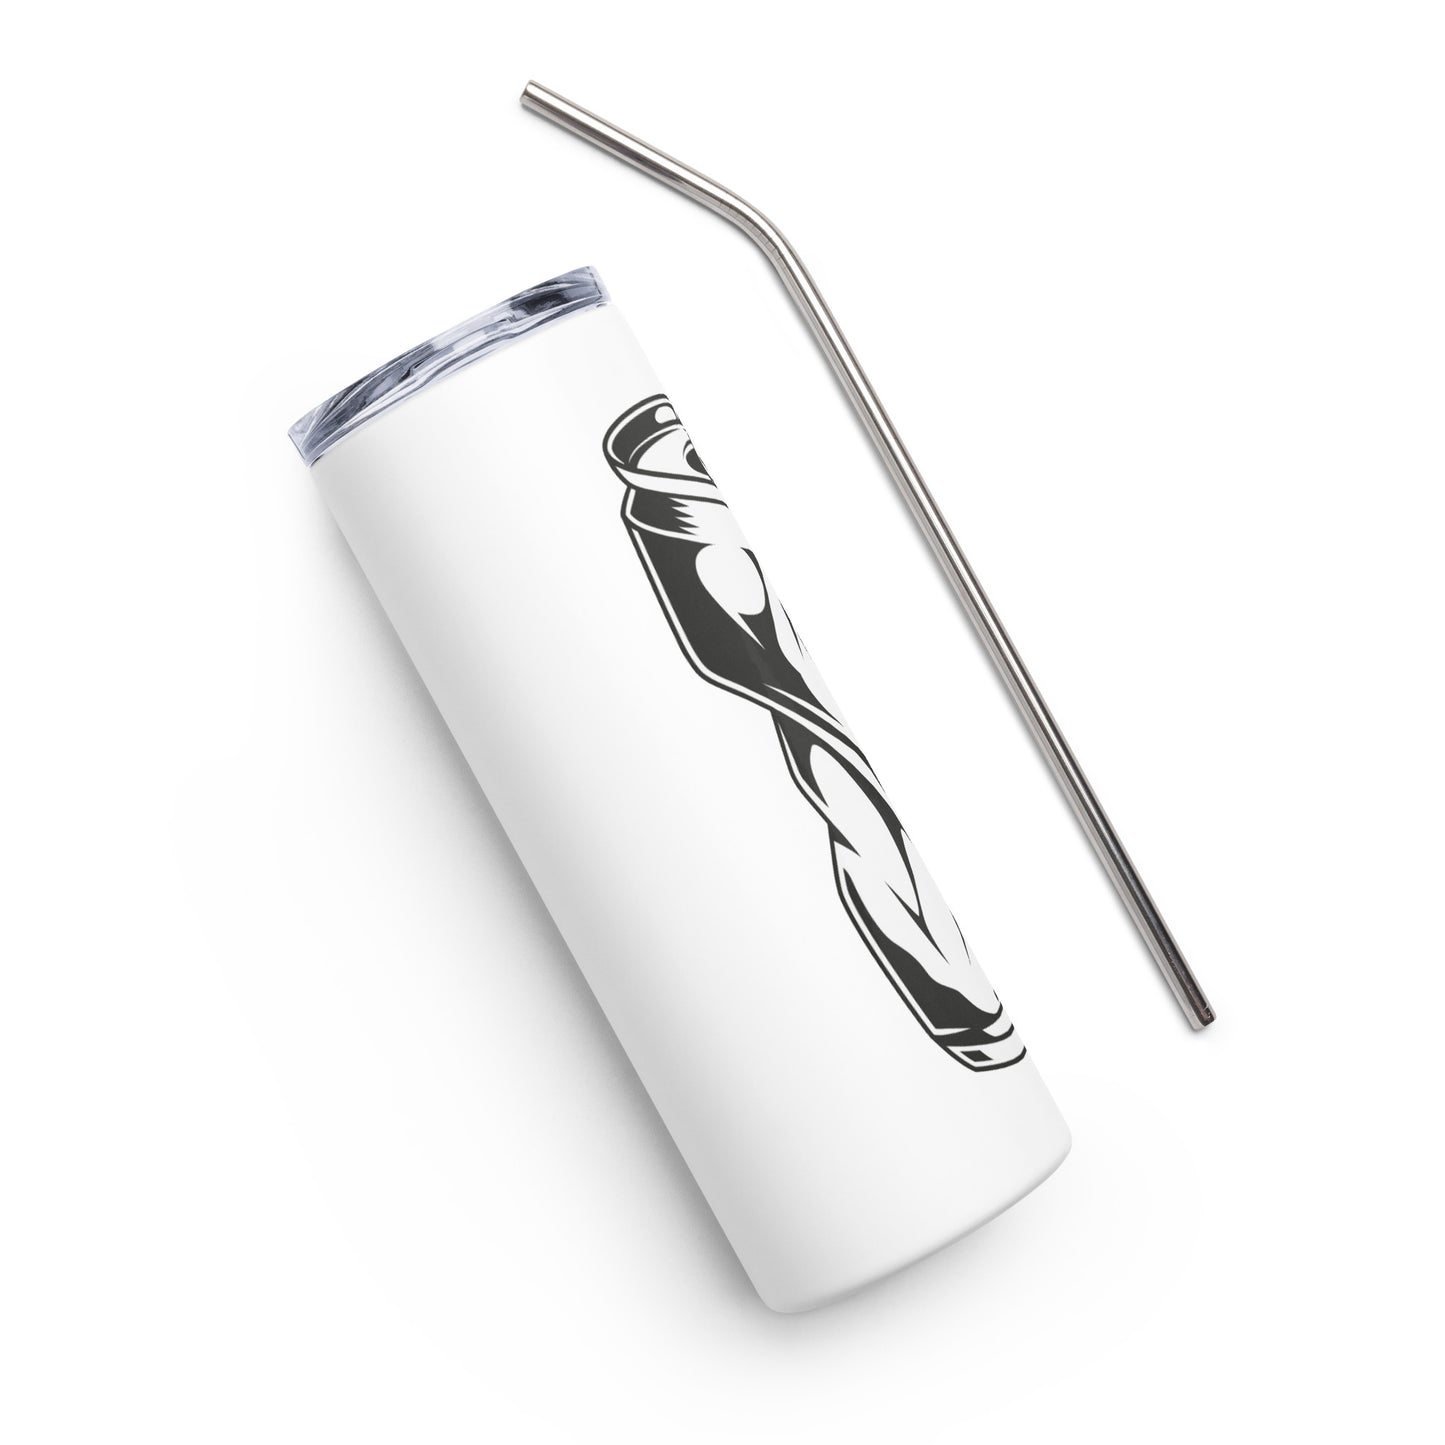 Crushed Can Stainless steel tumbler